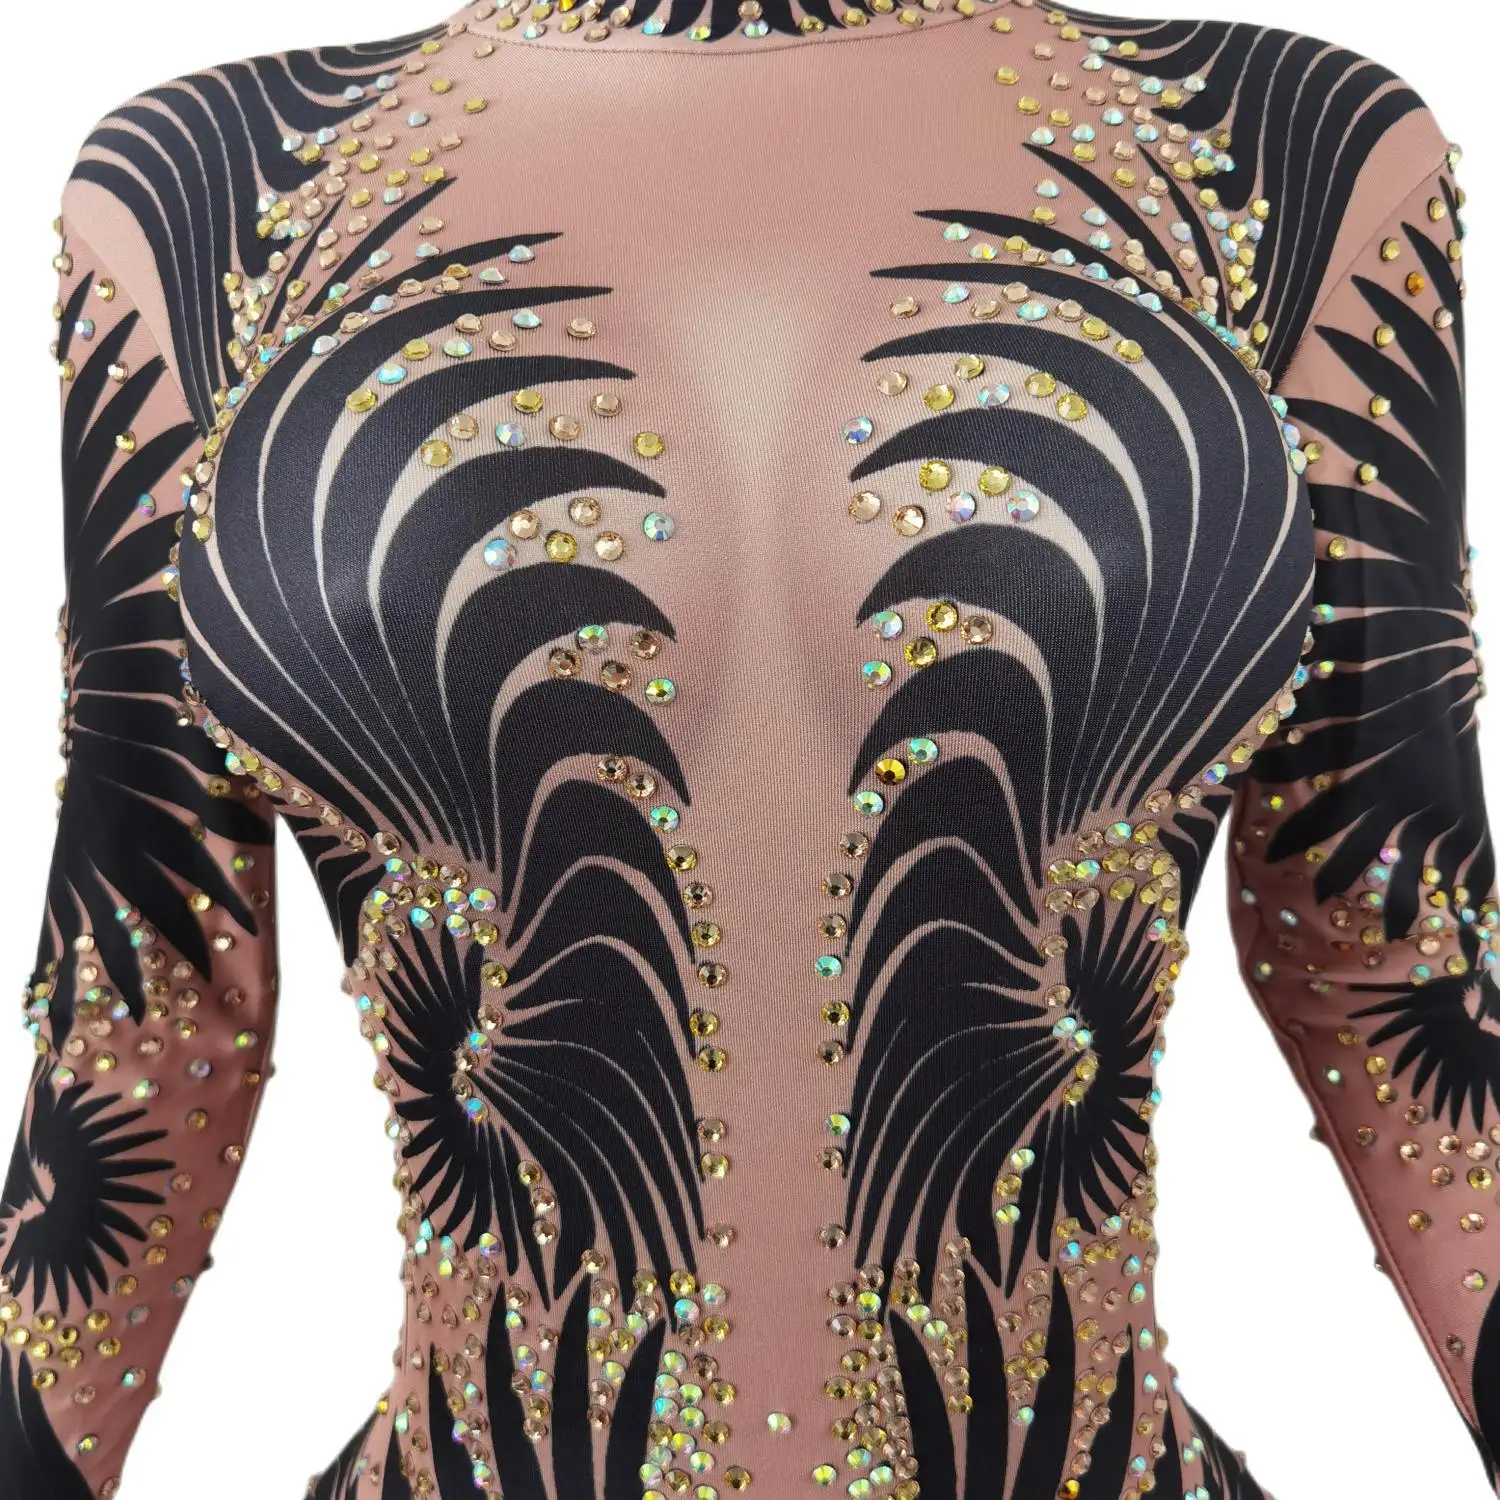 Sparkly Stone Feather Print Jumpsuit Women Sexy Birthday Party Bodysuit Prom Dresses Pole Dancer Performance Costume Feibiao